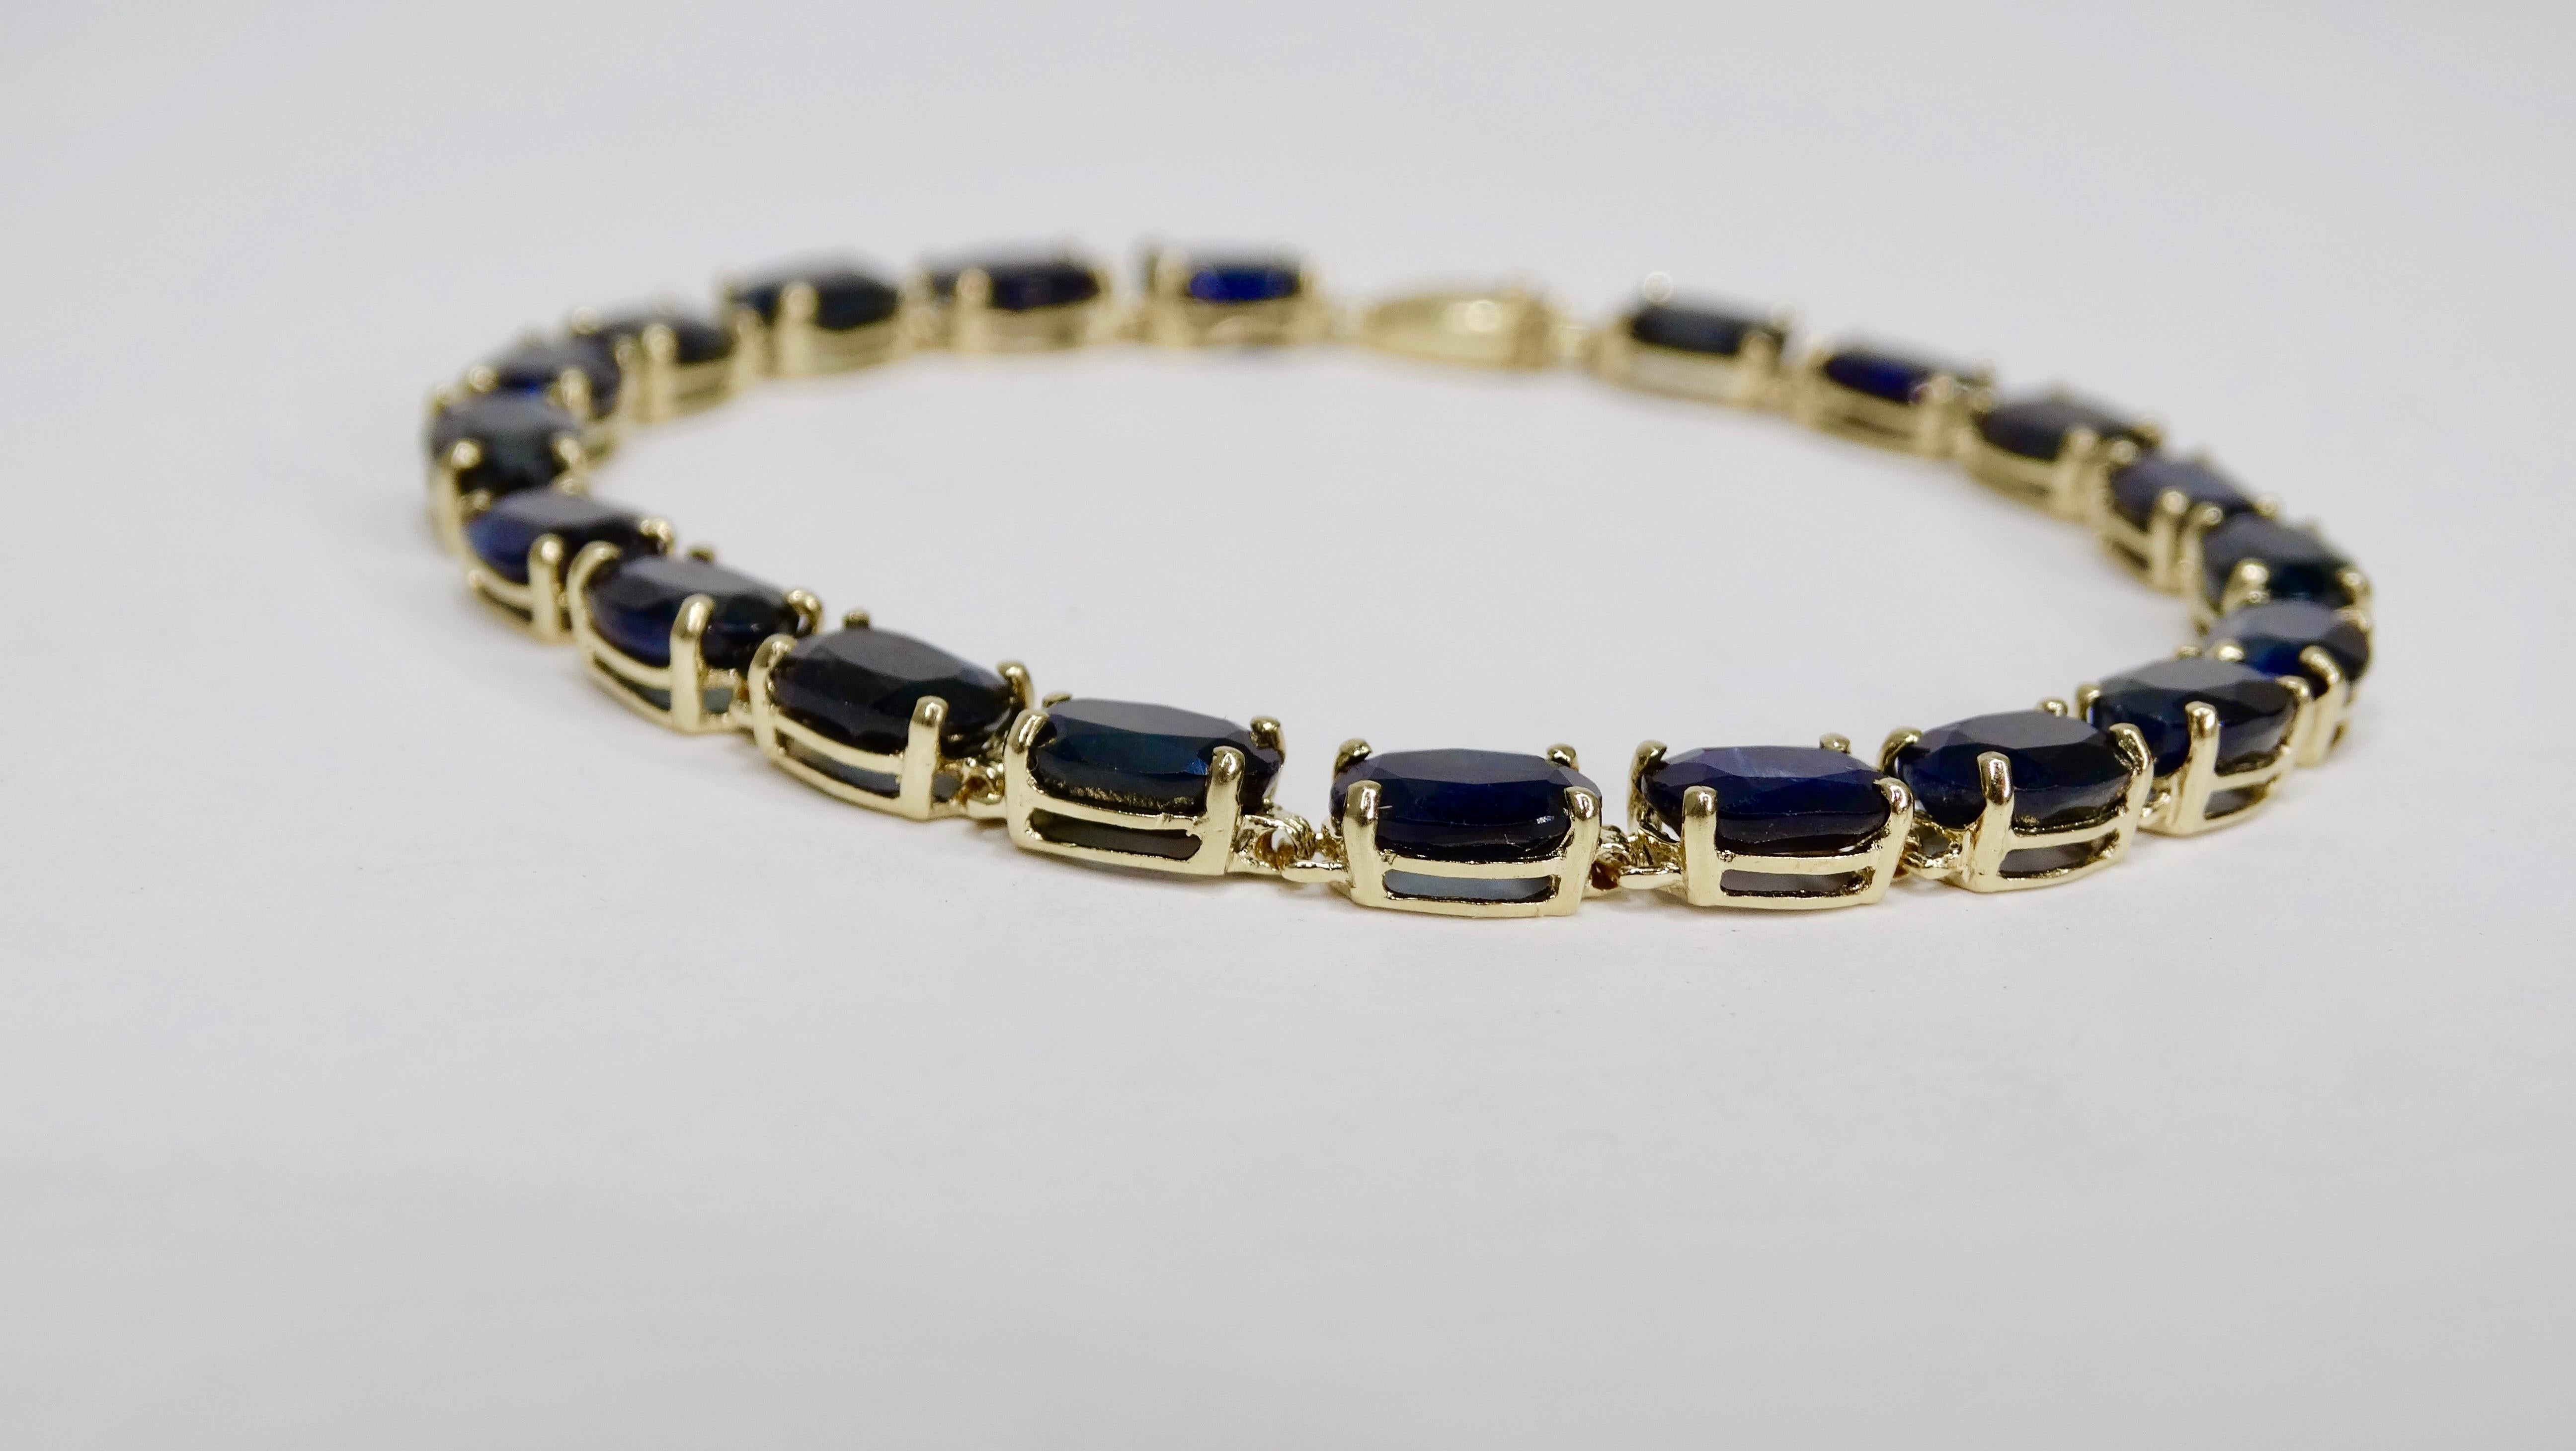 Elegant and timeless, this mid-20th century tennis bracelet is crafted from 14k gold and features 20 1ct oval cut Sapphires (20ct total) set in a prong setting with a tab closure and security clip. Weighs 9.11g in total weight. Wear day to day or